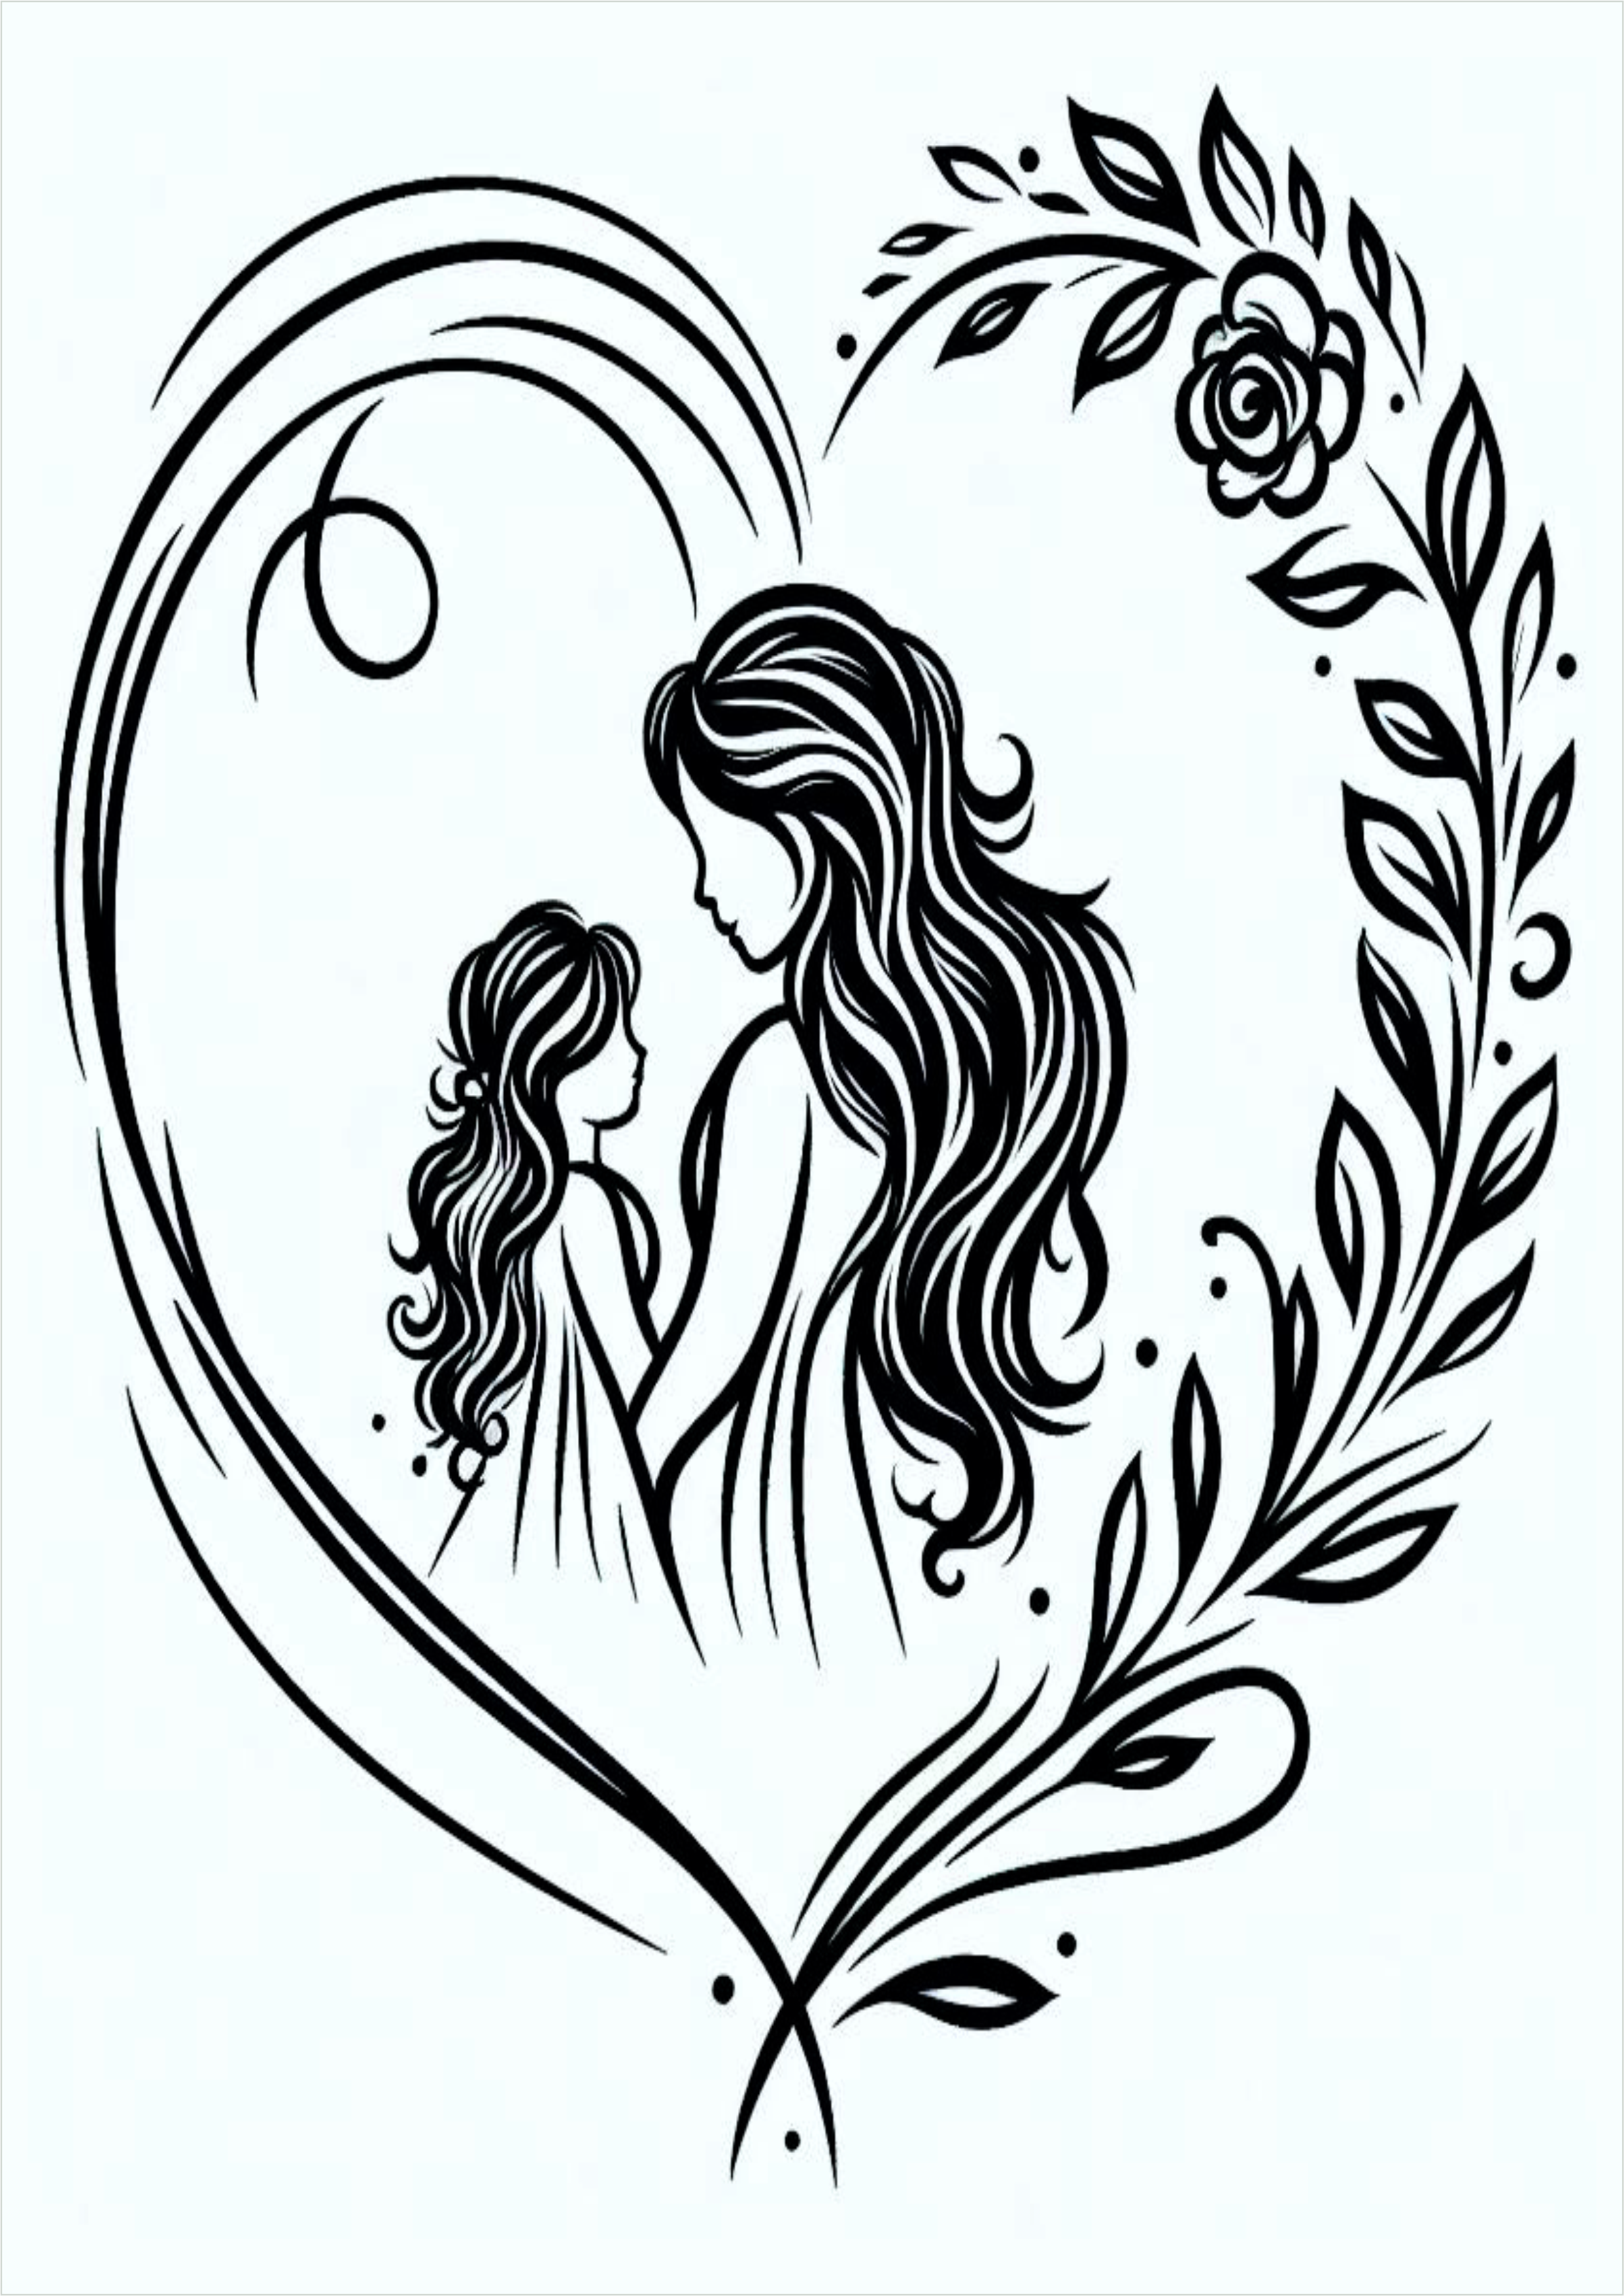 ideas for female tattoo PNG simple design mother and daughter in heart shape image pack free download studio graphic arts designer flowers